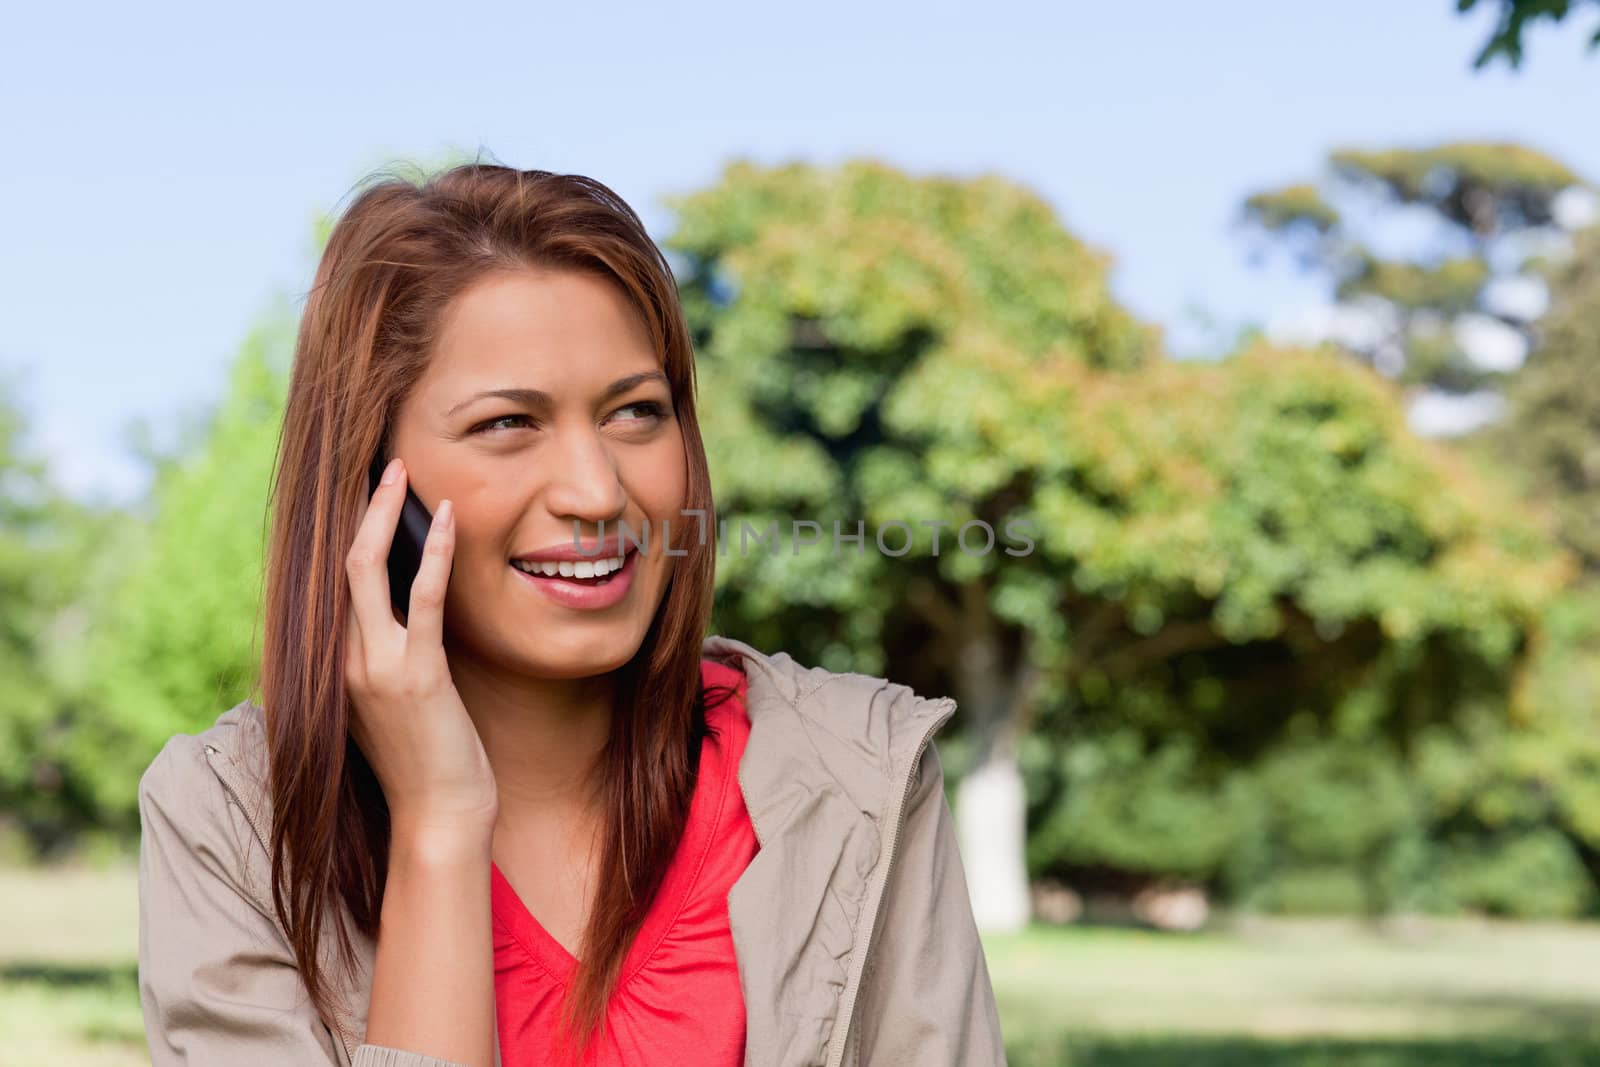 Woman smiling while looking towards her left side in an open gra by Wavebreakmedia